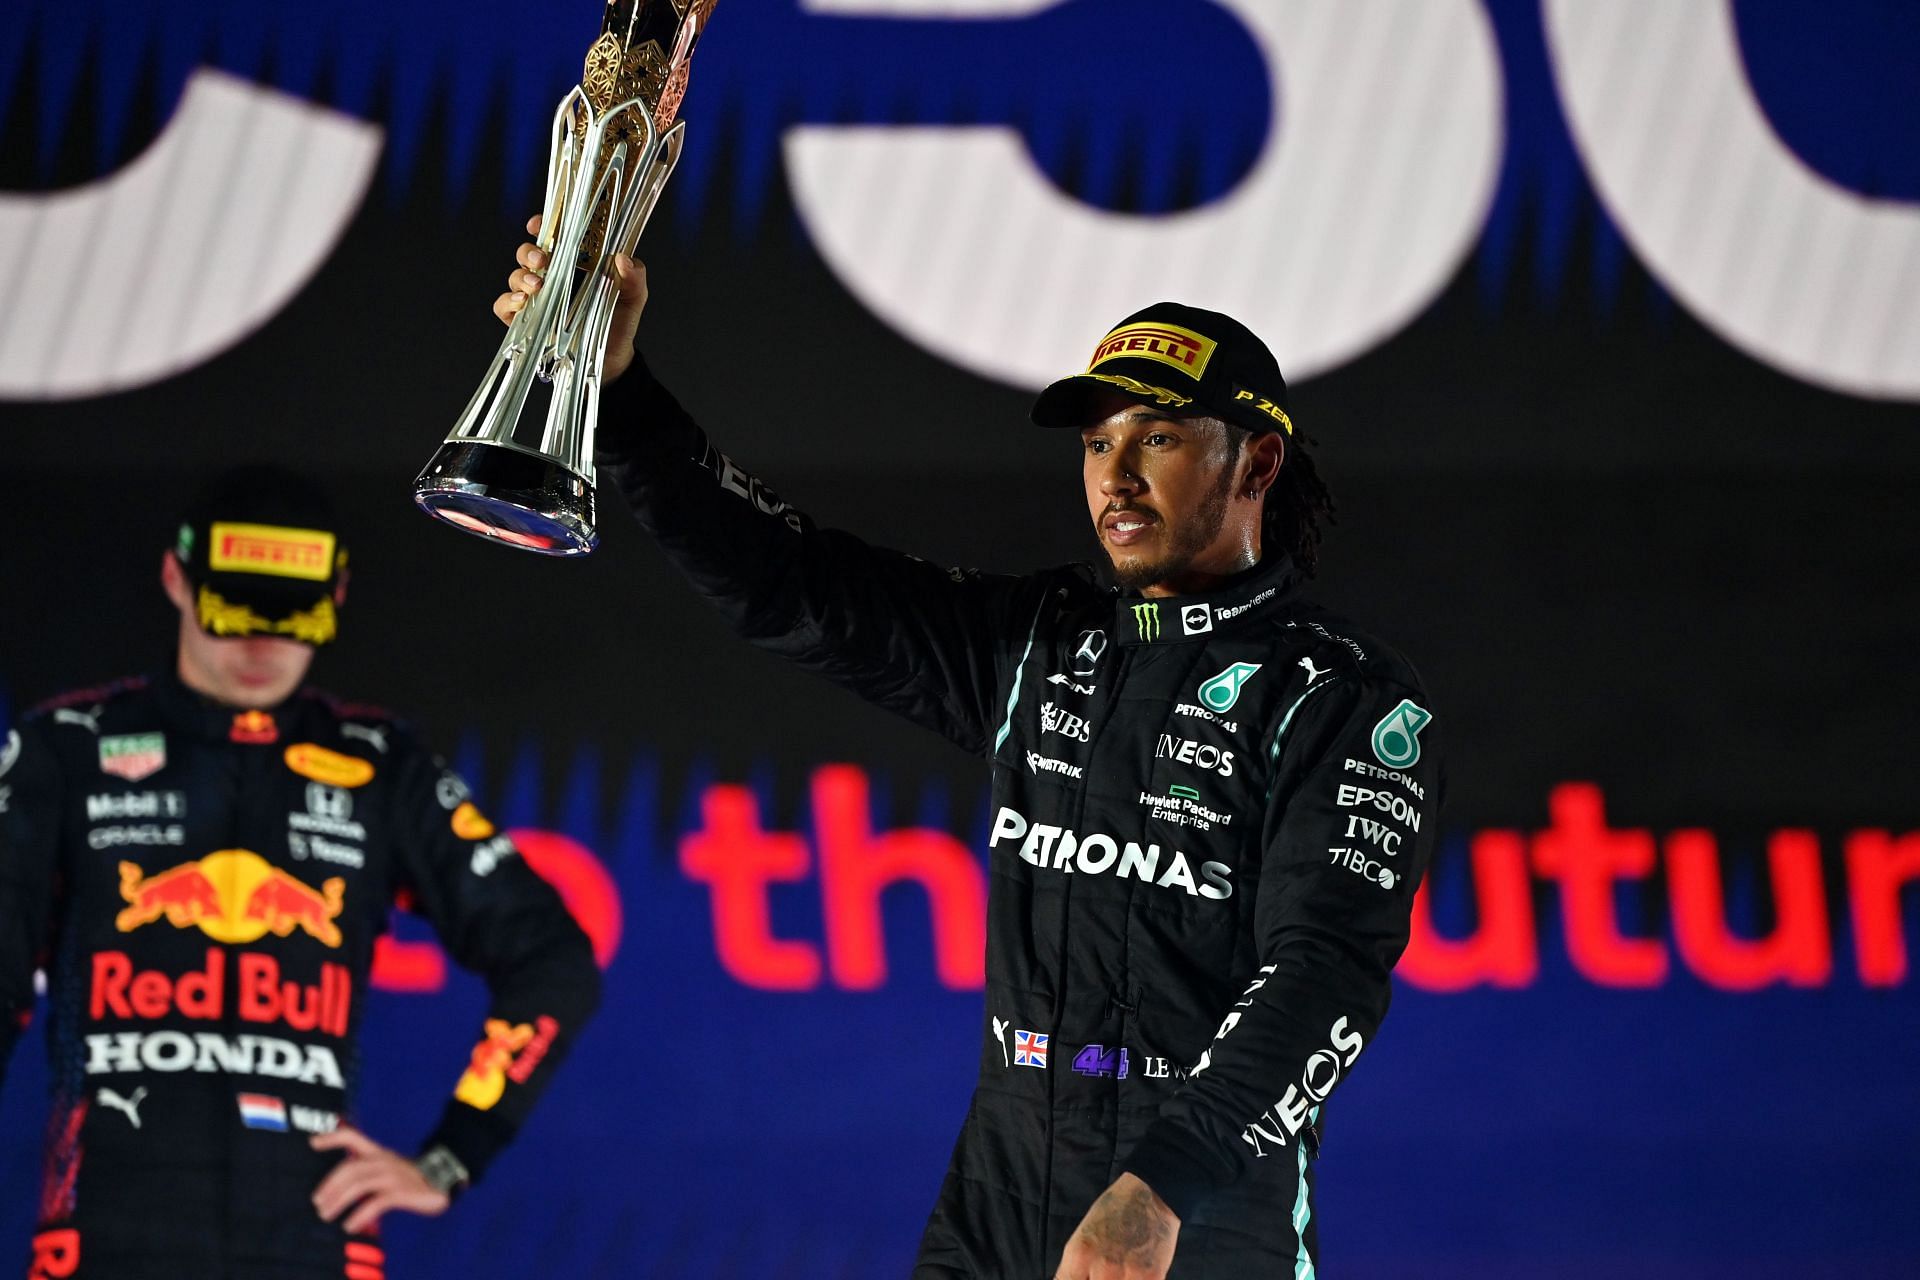 Lewis Hamilton with his trophy for the winner of the F1 Grand Prix of Saudi Arabia